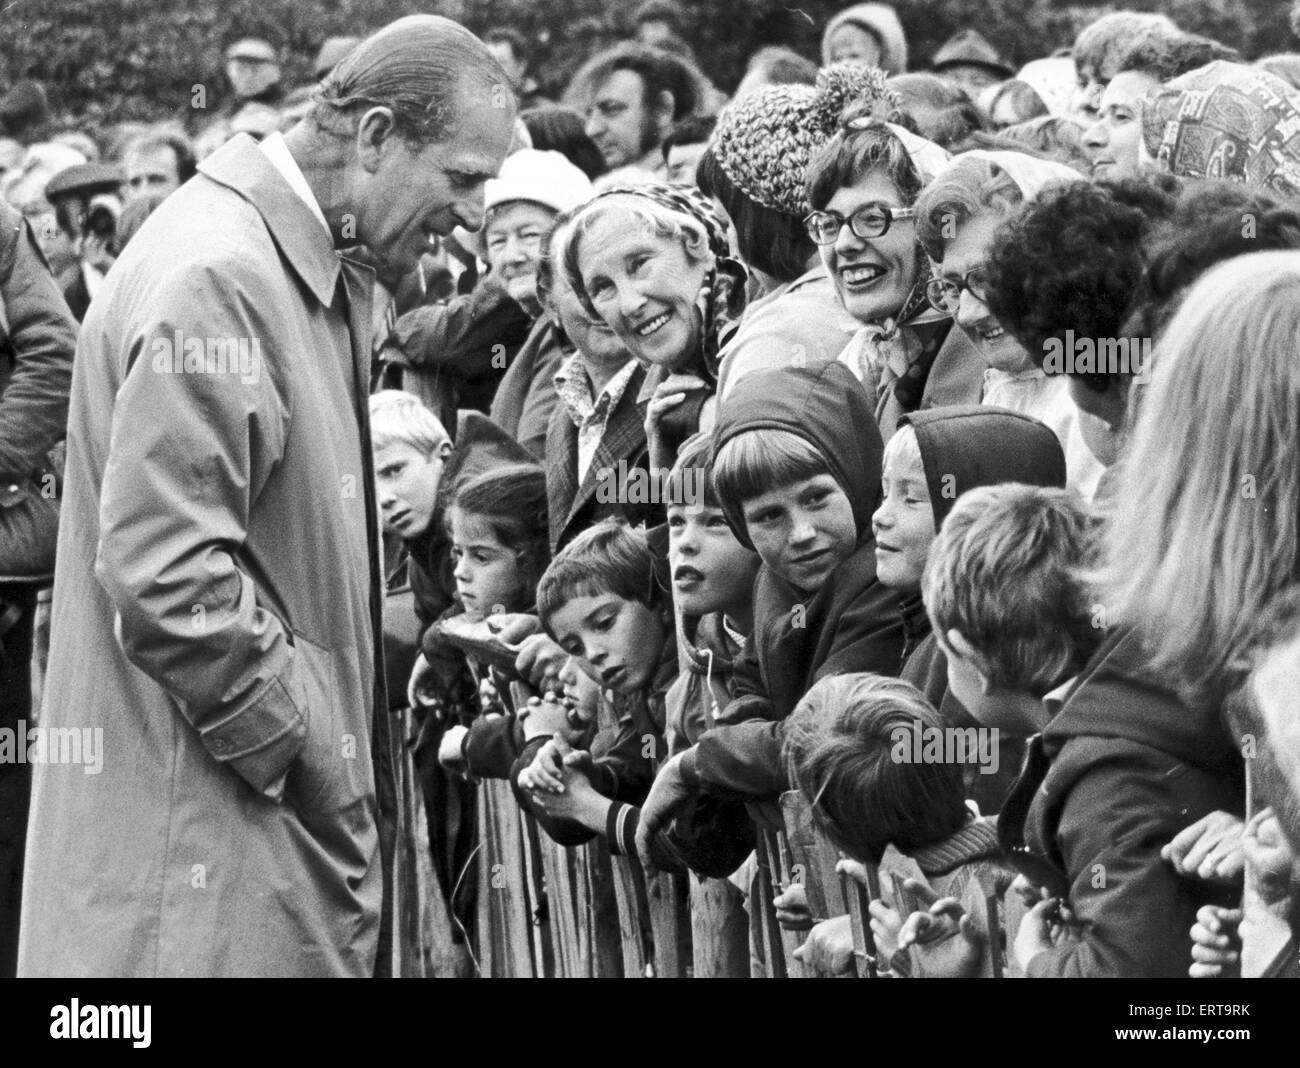 Prince Phillip the Duke of Edinburgh seen here chatting with the crowds gathered in Saltburn  Gardens to celebrate the 150th anniversary of the Darlington to Stockton railway. 27th September 1975 Stock Photo